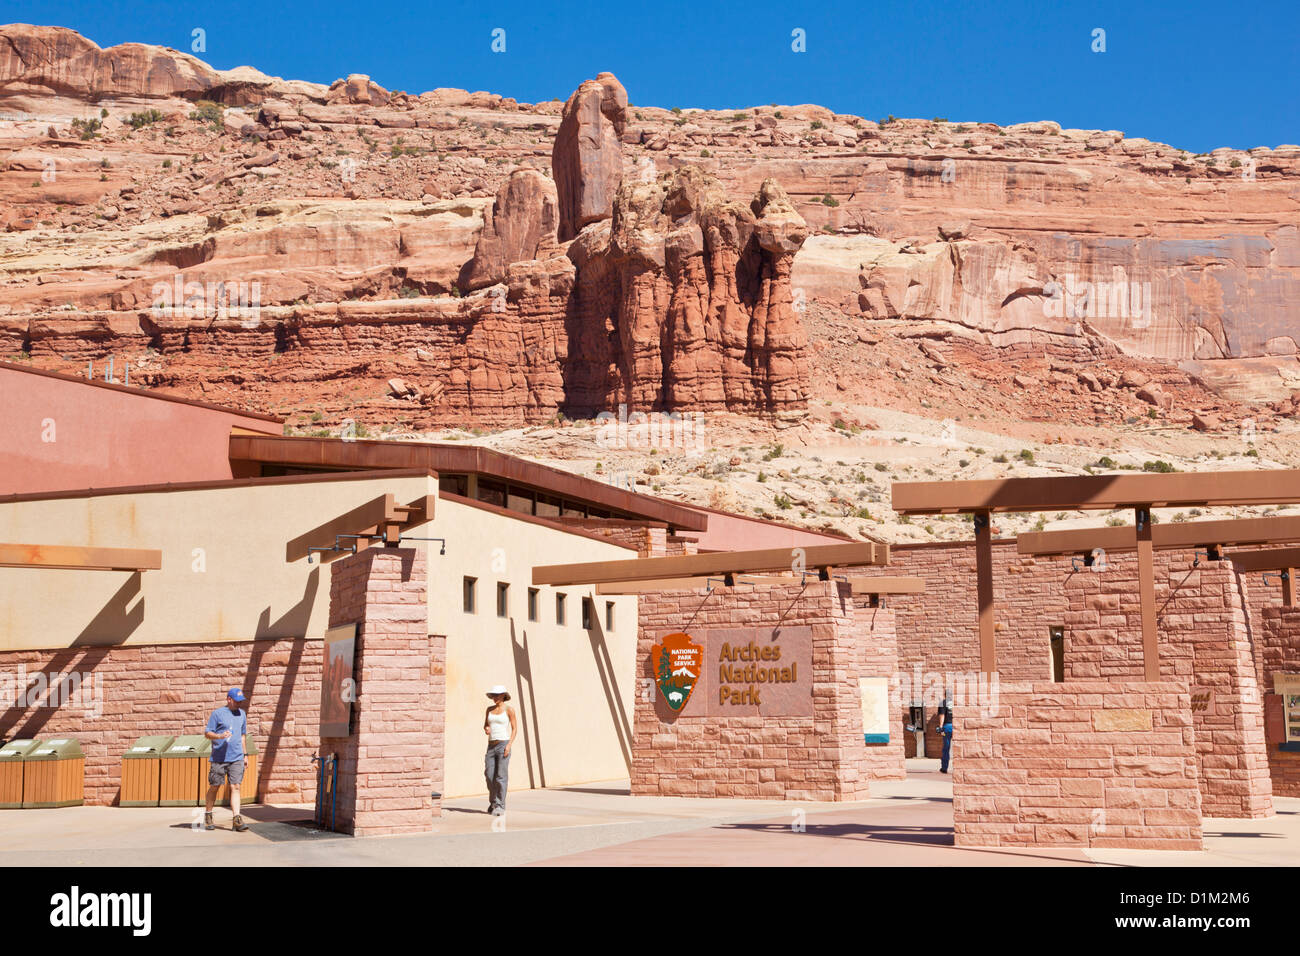 Arches National Park Visitor Centre Centre Moab Utah USA United States of America Banque D'Images